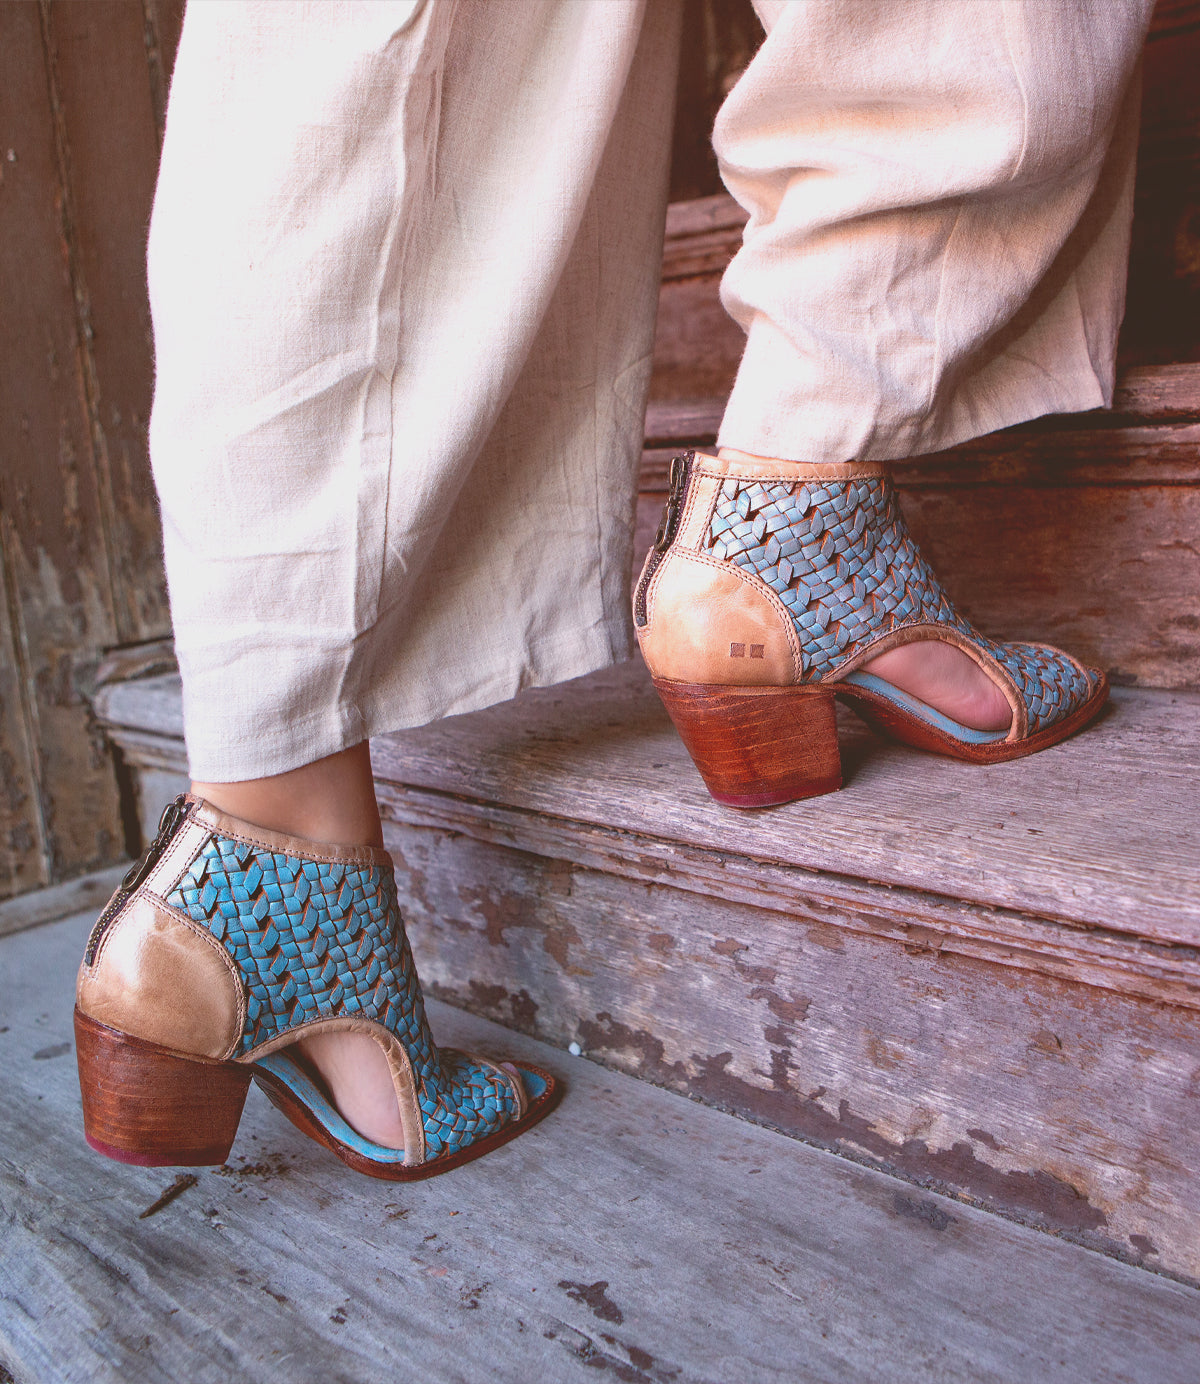 A person wearing stylish blue patterned handmade peep-toe ankle boots on a weathered wooden step.